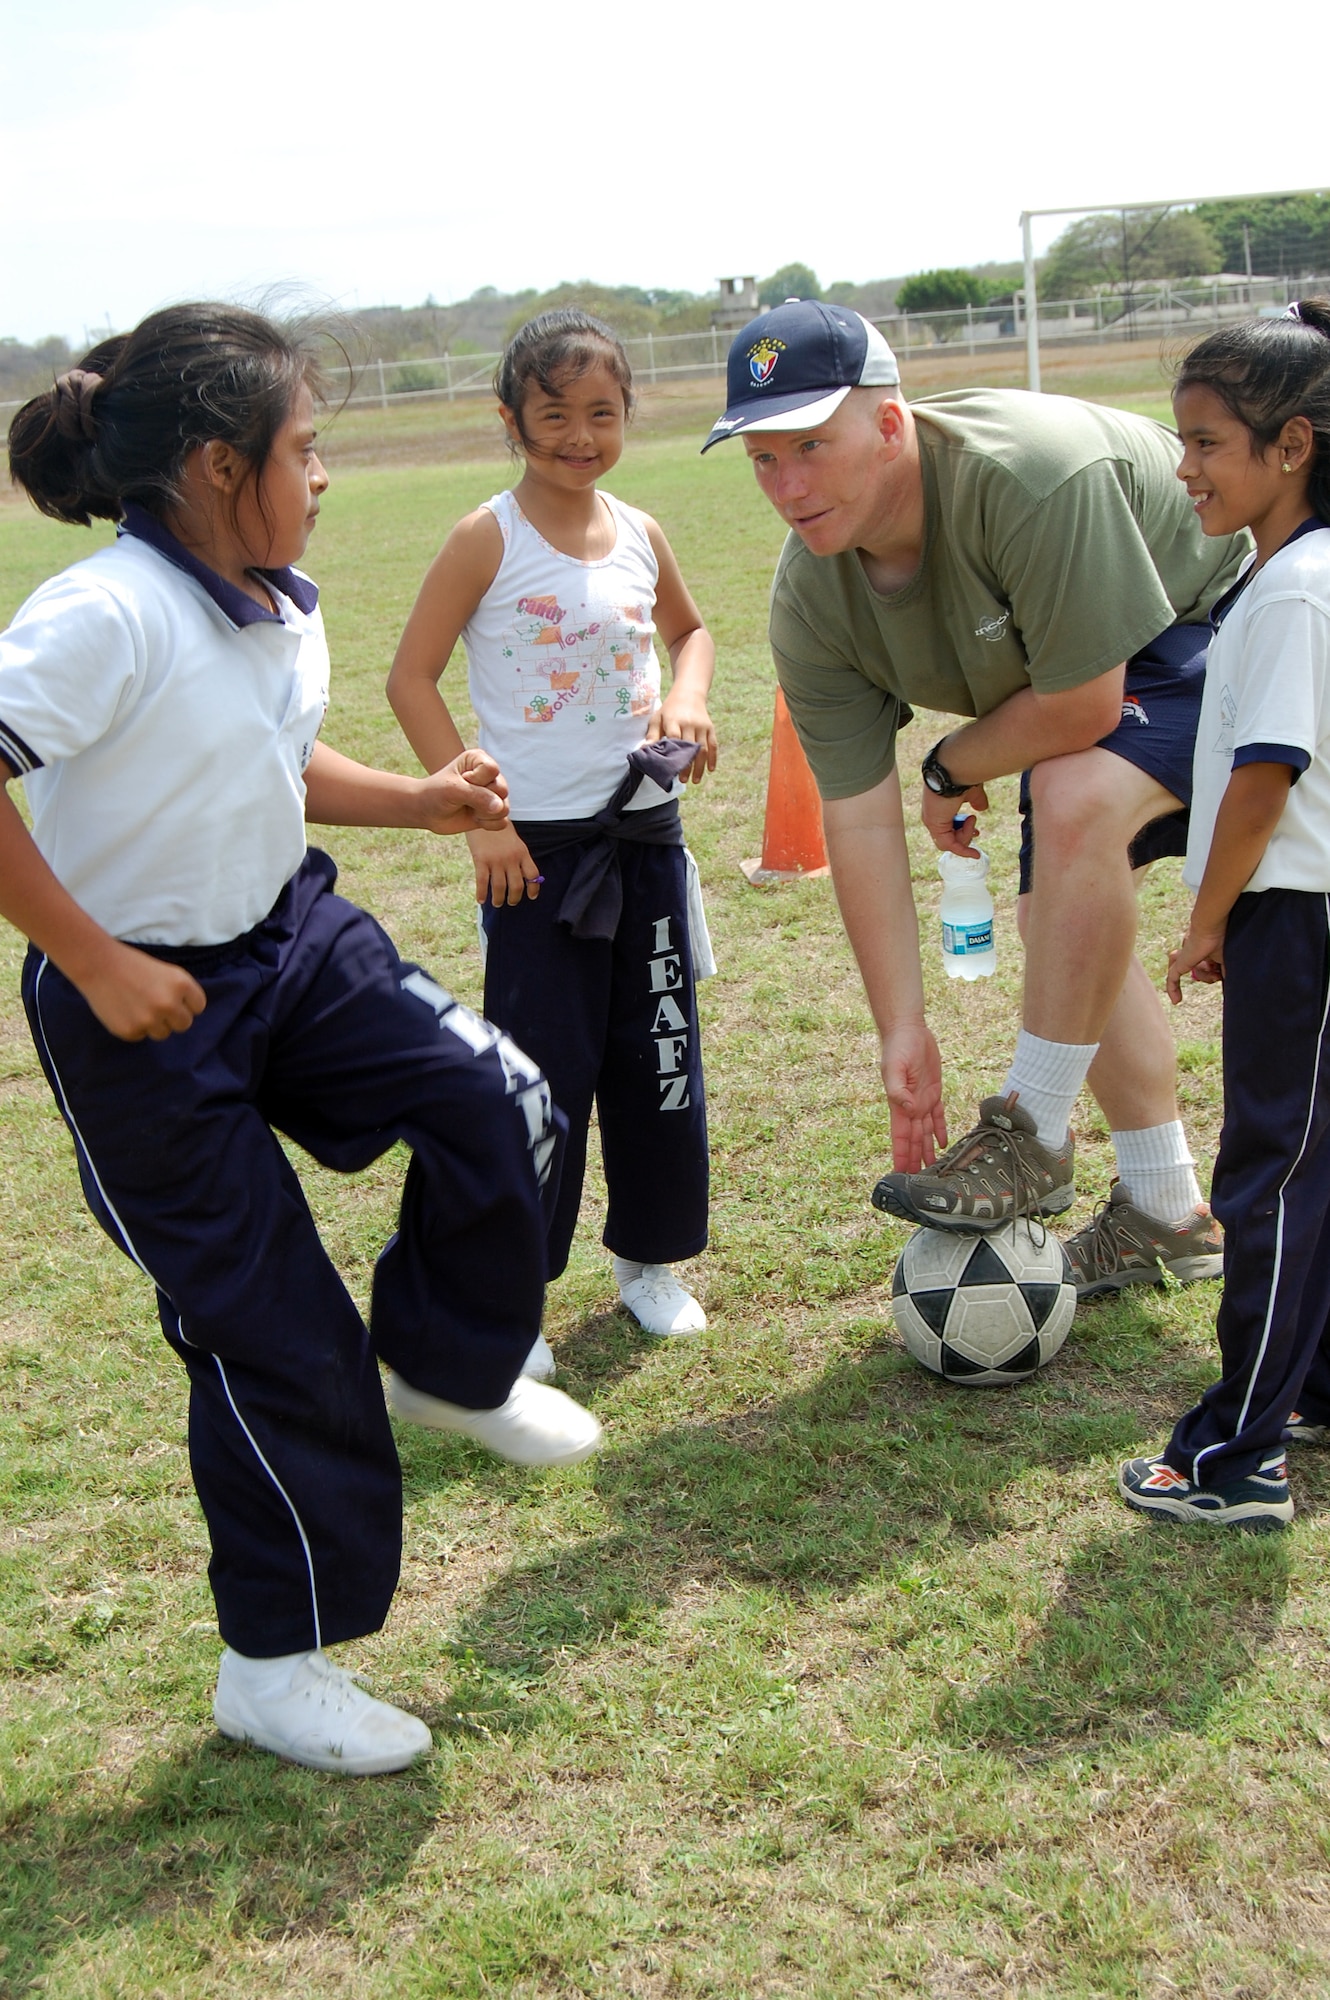 Maj. Brian Shumway, 478th Expeditionary Operations Squadron director of operations, teaches the basics of soccer to students from the Angelica Flores school at FOL Manta April 25. Volunteers from the FOL invited over 40 students to a sports day to learn American sports and build teamwork. (U.S. Air Force photo by 1st. Lt Beth Woodward)